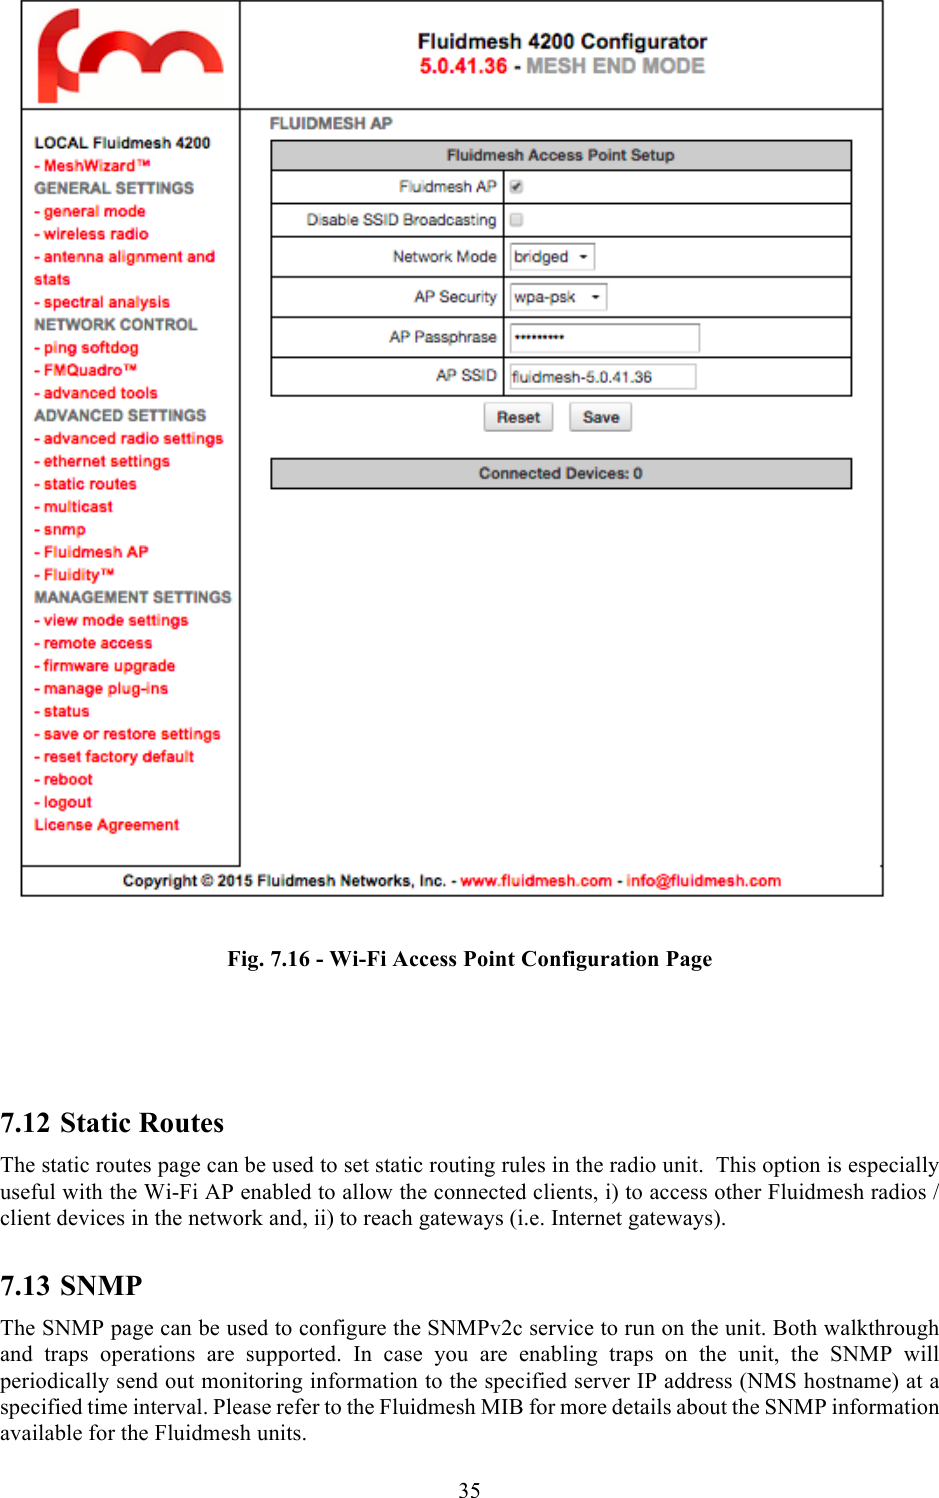  35   Fig. 7.16 - Wi-Fi Access Point Configuration Page   7.12 Static Routes The static routes page can be used to set static routing rules in the radio unit.  This option is especially useful with the Wi-Fi AP enabled to allow the connected clients, i) to access other Fluidmesh radios / client devices in the network and, ii) to reach gateways (i.e. Internet gateways).  7.13 SNMP The SNMP page can be used to configure the SNMPv2c service to run on the unit. Both walkthrough and  traps  operations  are  supported.  In  case  you  are  enabling  traps  on  the  unit,  the  SNMP  will periodically send out monitoring information to the specified server IP address (NMS hostname) at a specified time interval. Please refer to the Fluidmesh MIB for more details about the SNMP information available for the Fluidmesh units. 